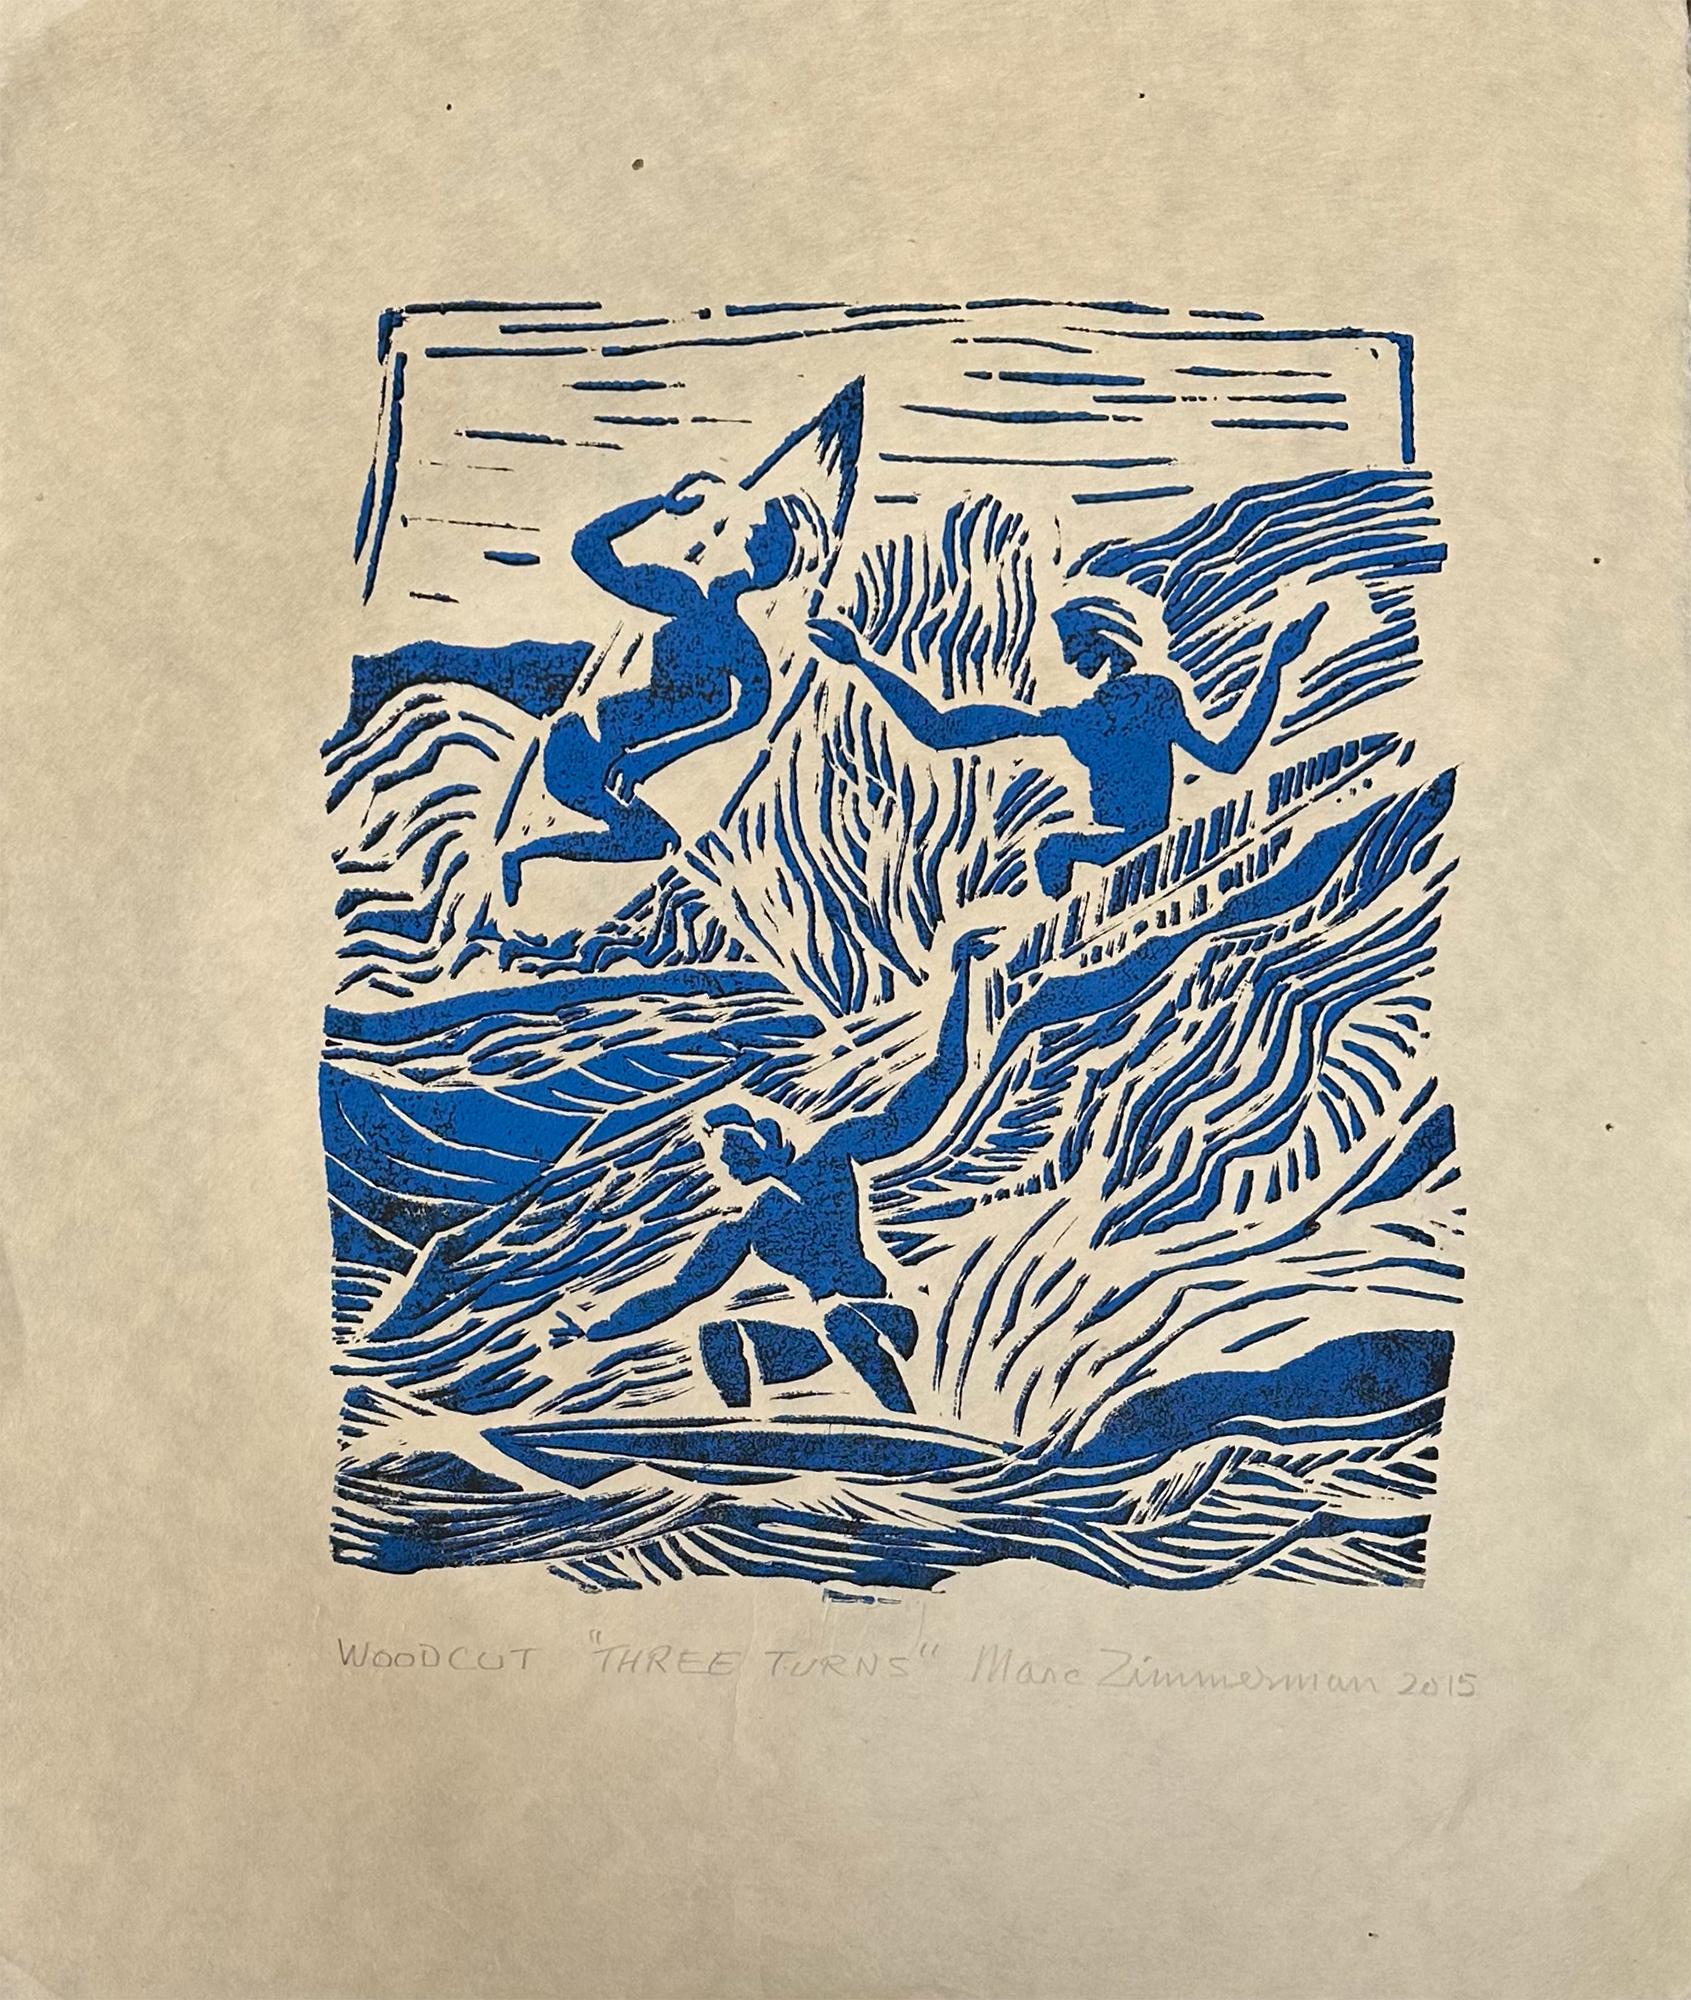 Three Turns - Surfing Art - Figurative - Woodcut Print By Marc Zimmerman

Limited Edition 01/04

This masterwork is exhibited in the Zimmerman Gallery, Carmel CA.

Immerse yourself in the captivating world of surfing and ocean vibes with Marc